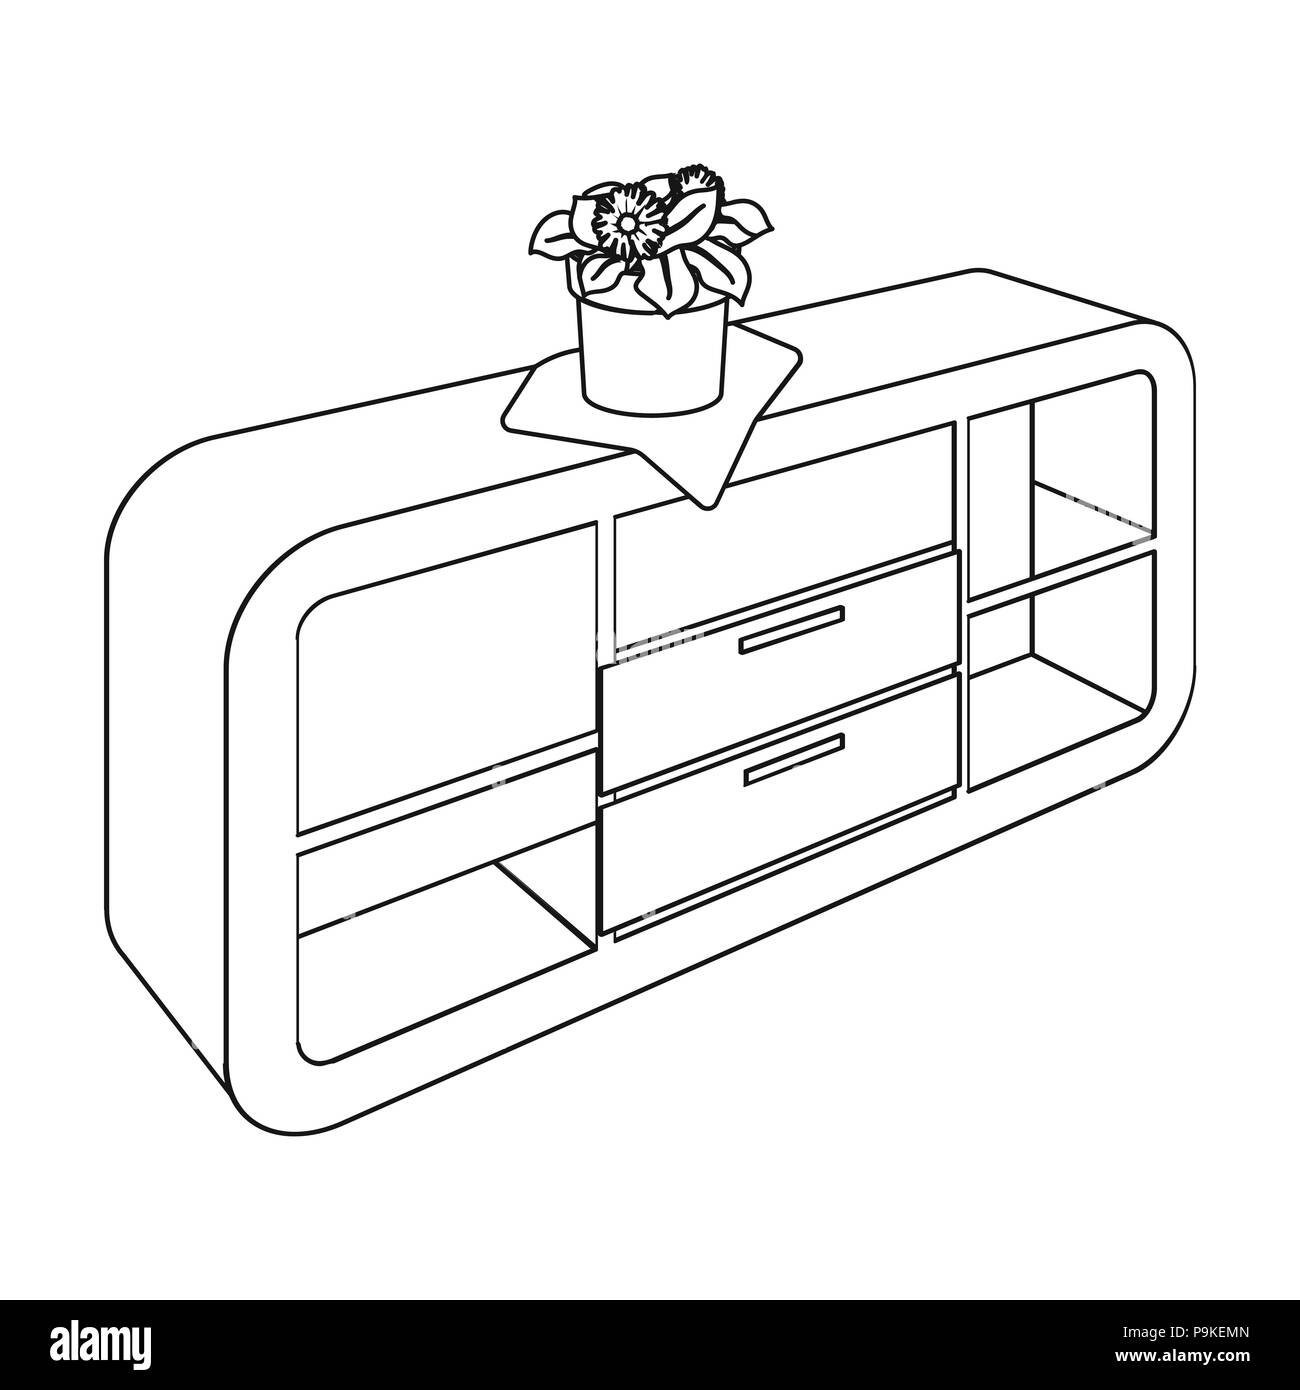 Chest Shelving With Shelves And Flower Furniture And Interior